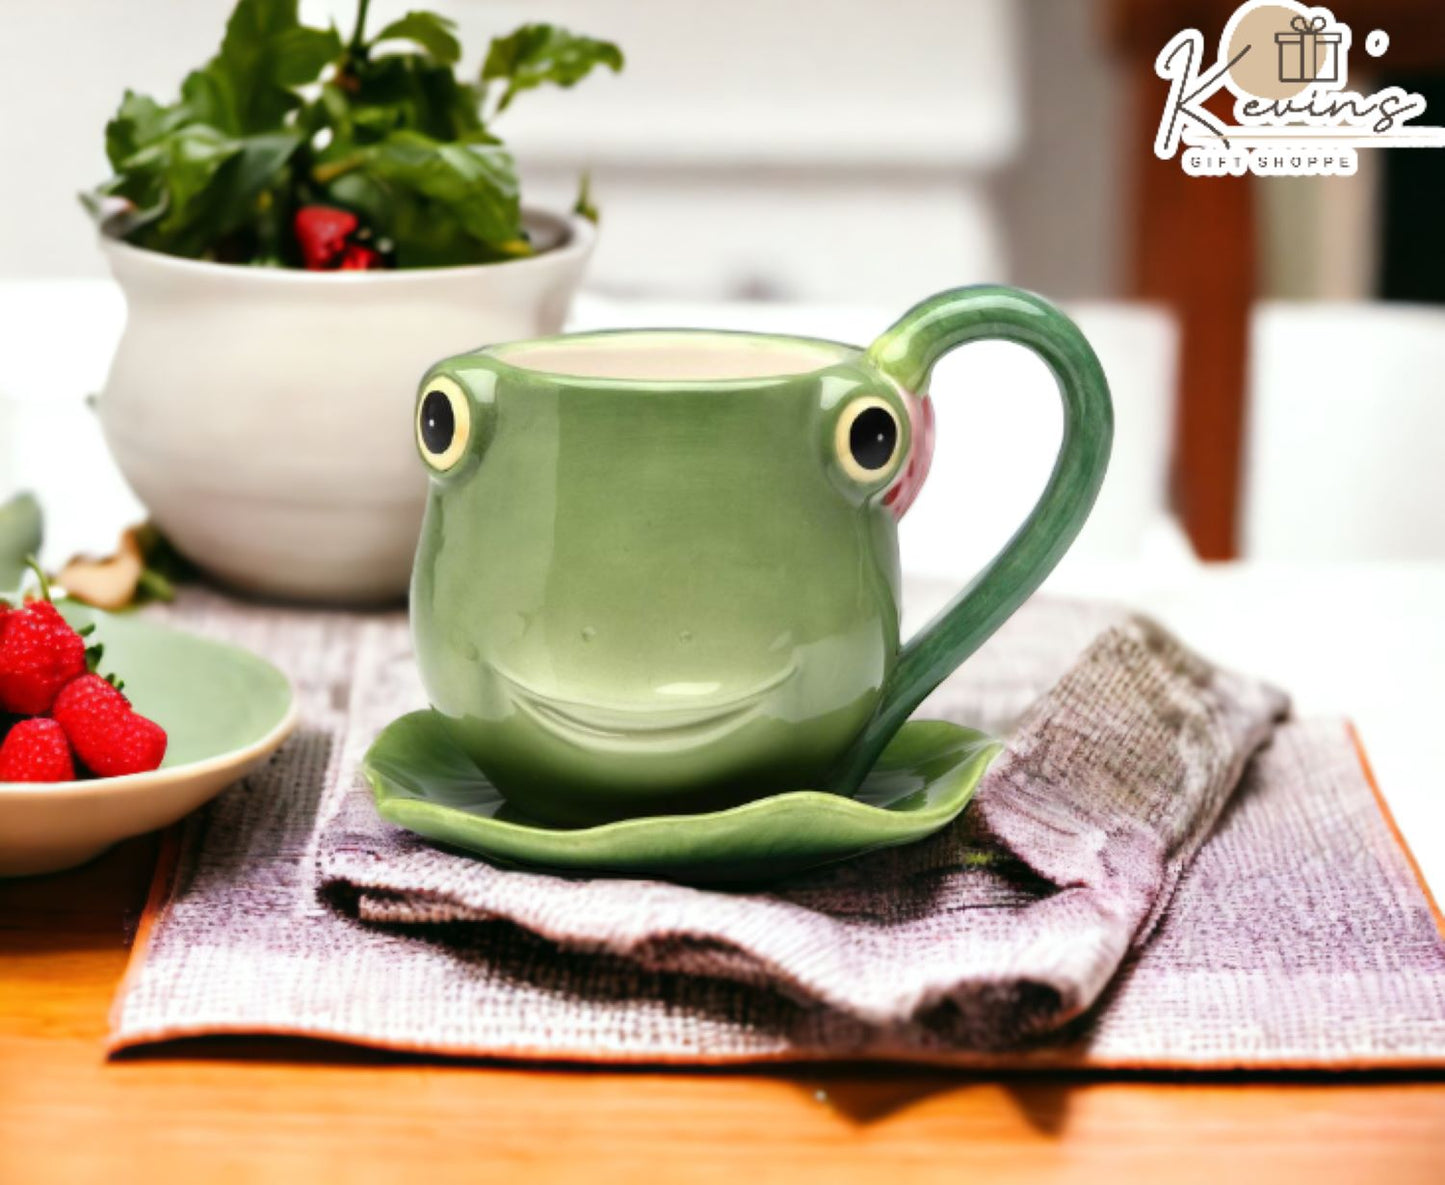 Ceramic Frog Cup and Saucer, Gift for Her, Gift for Mom, Gift for Friend or Coworker, Tea Party Décor, Café Decor, Cottagecore